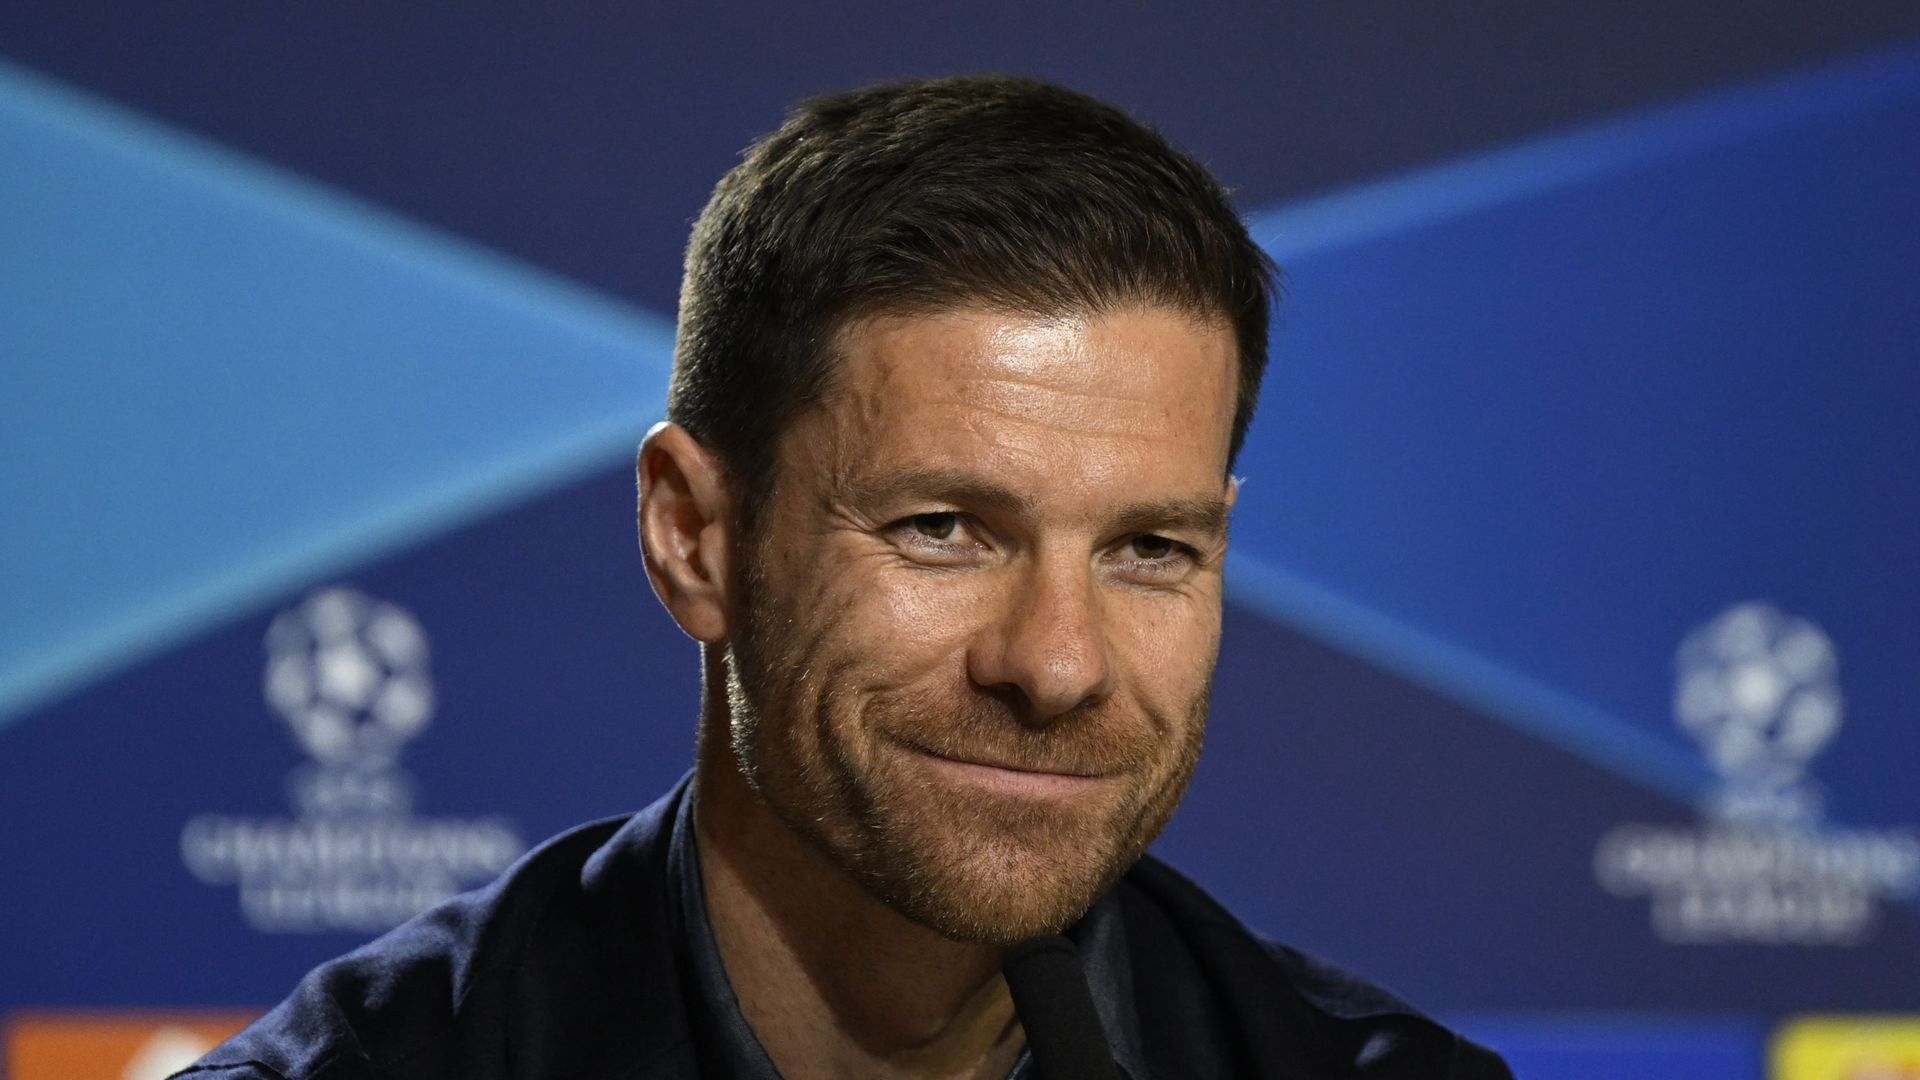 Xabi Alonso veut continuer sa route en Coupe d'Europe.